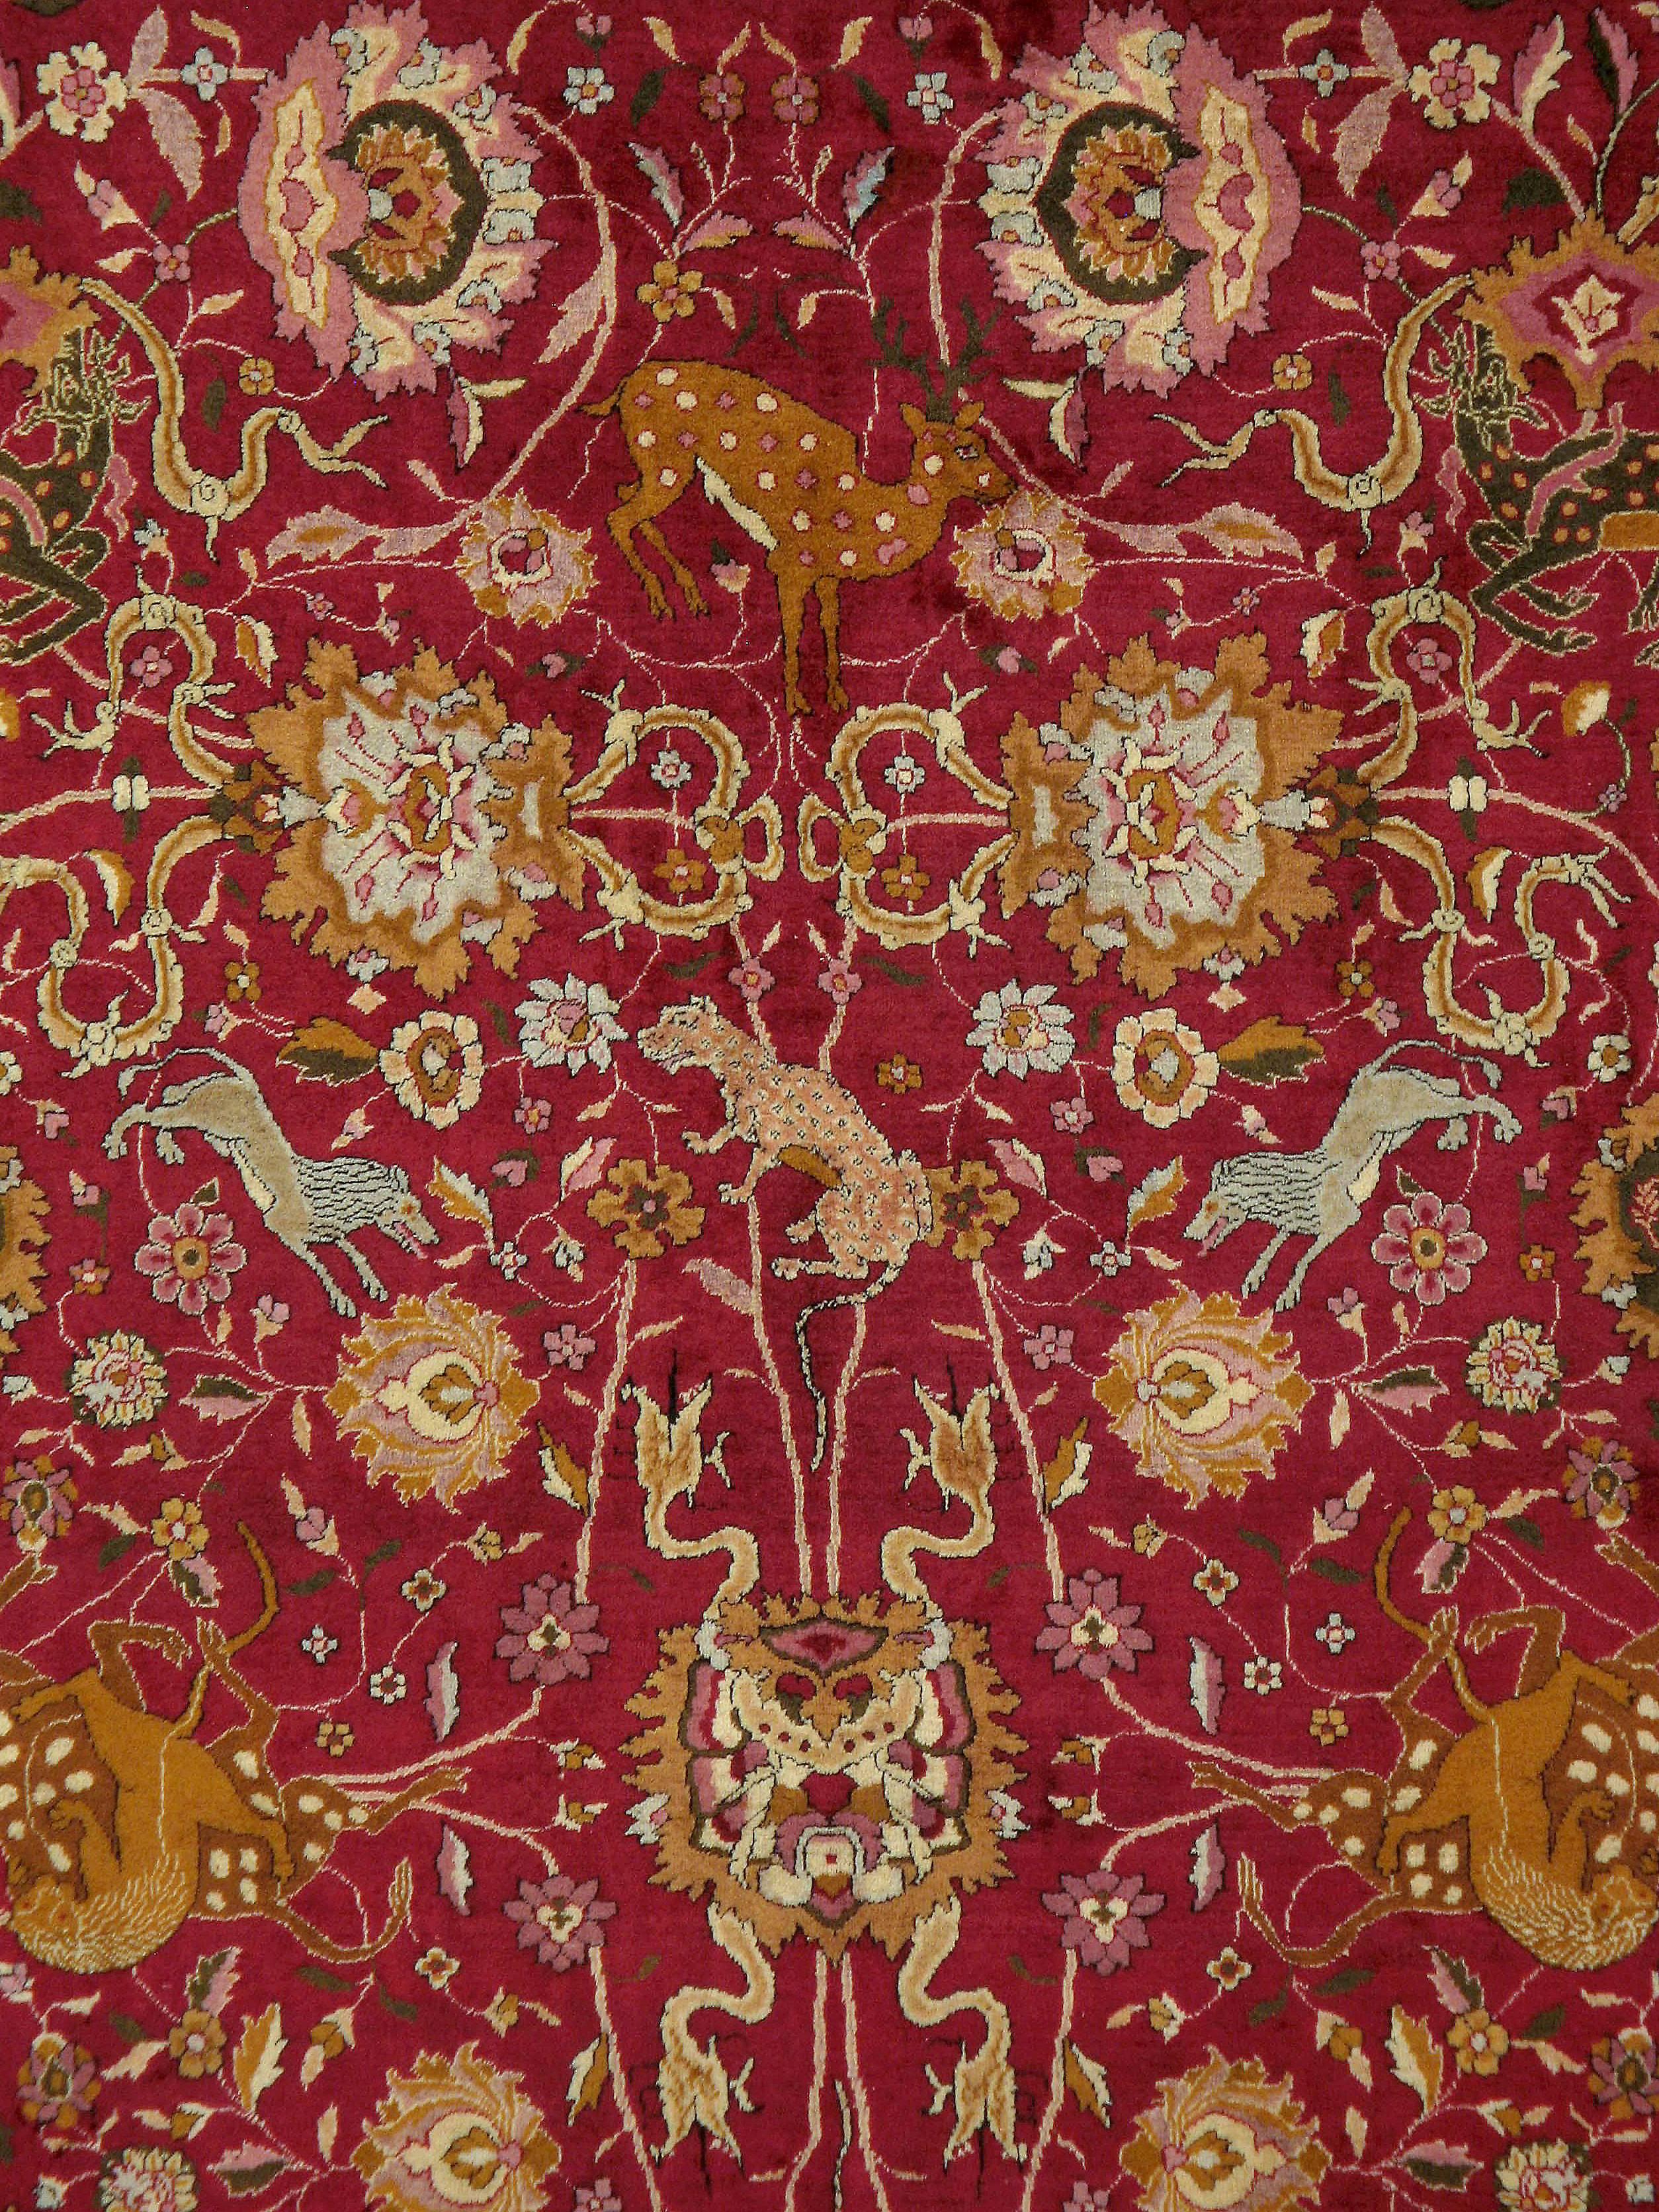 An antique Indian Lahore carpet, from the first quarter of the 20th century, with an allover pictorial design over a red field.